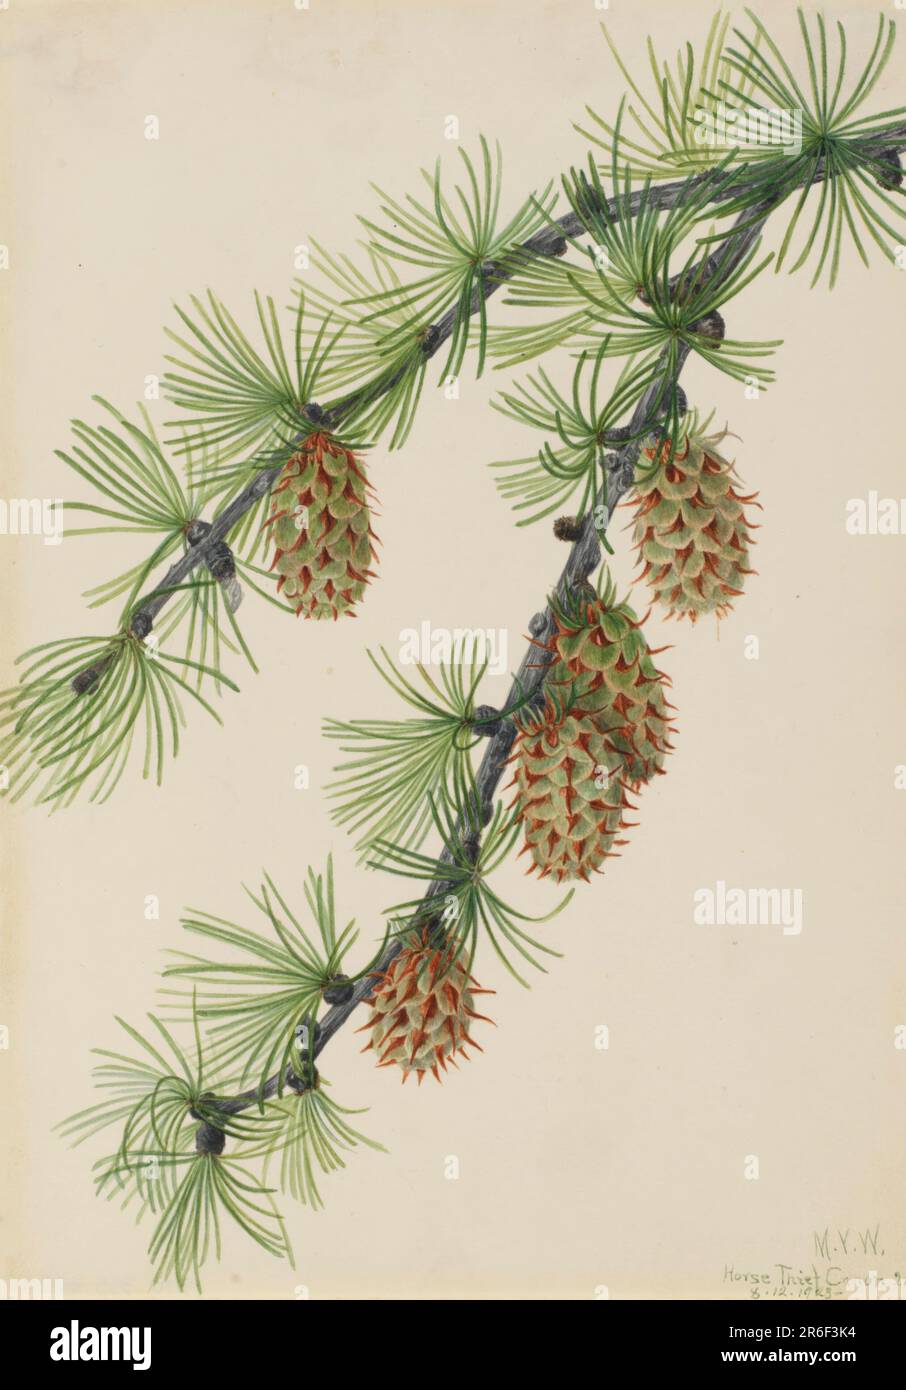 Western Larch (Larix occidentalis). Watercolor on paper. Date: 1923. Museum: Smithsonian American Art Museum. Stock Photo